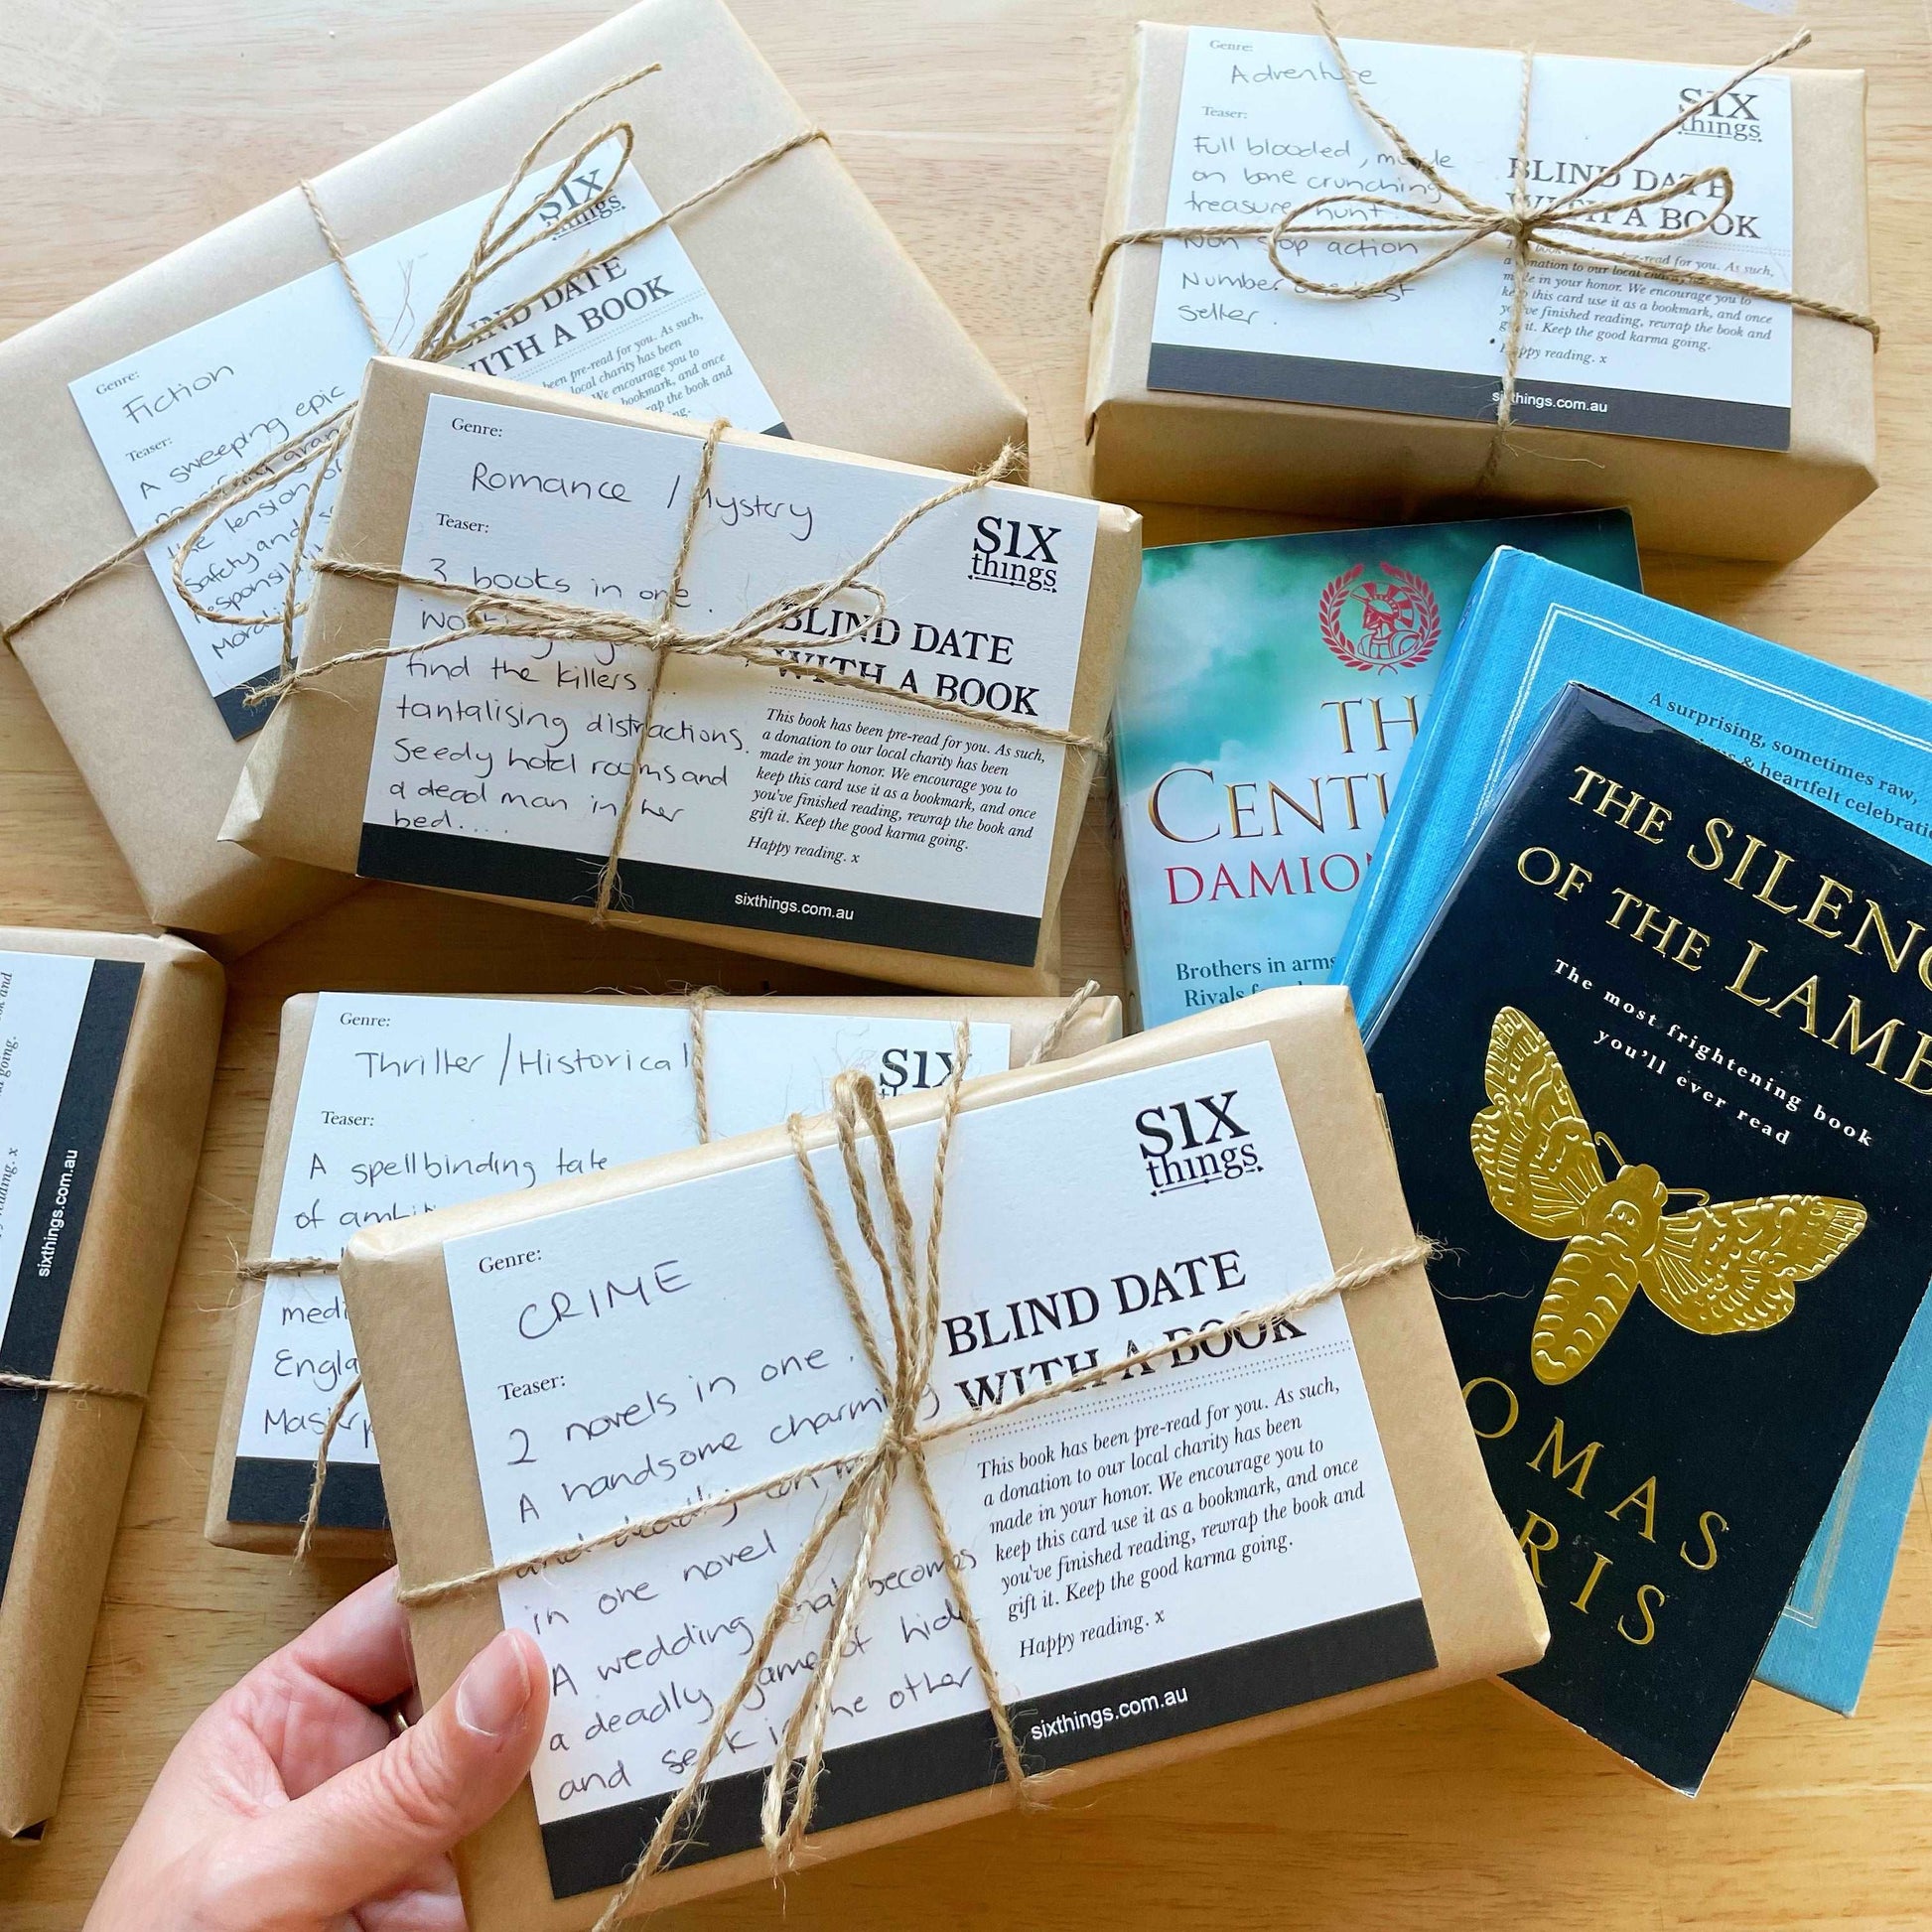 Blind date with a book - lucky dip book